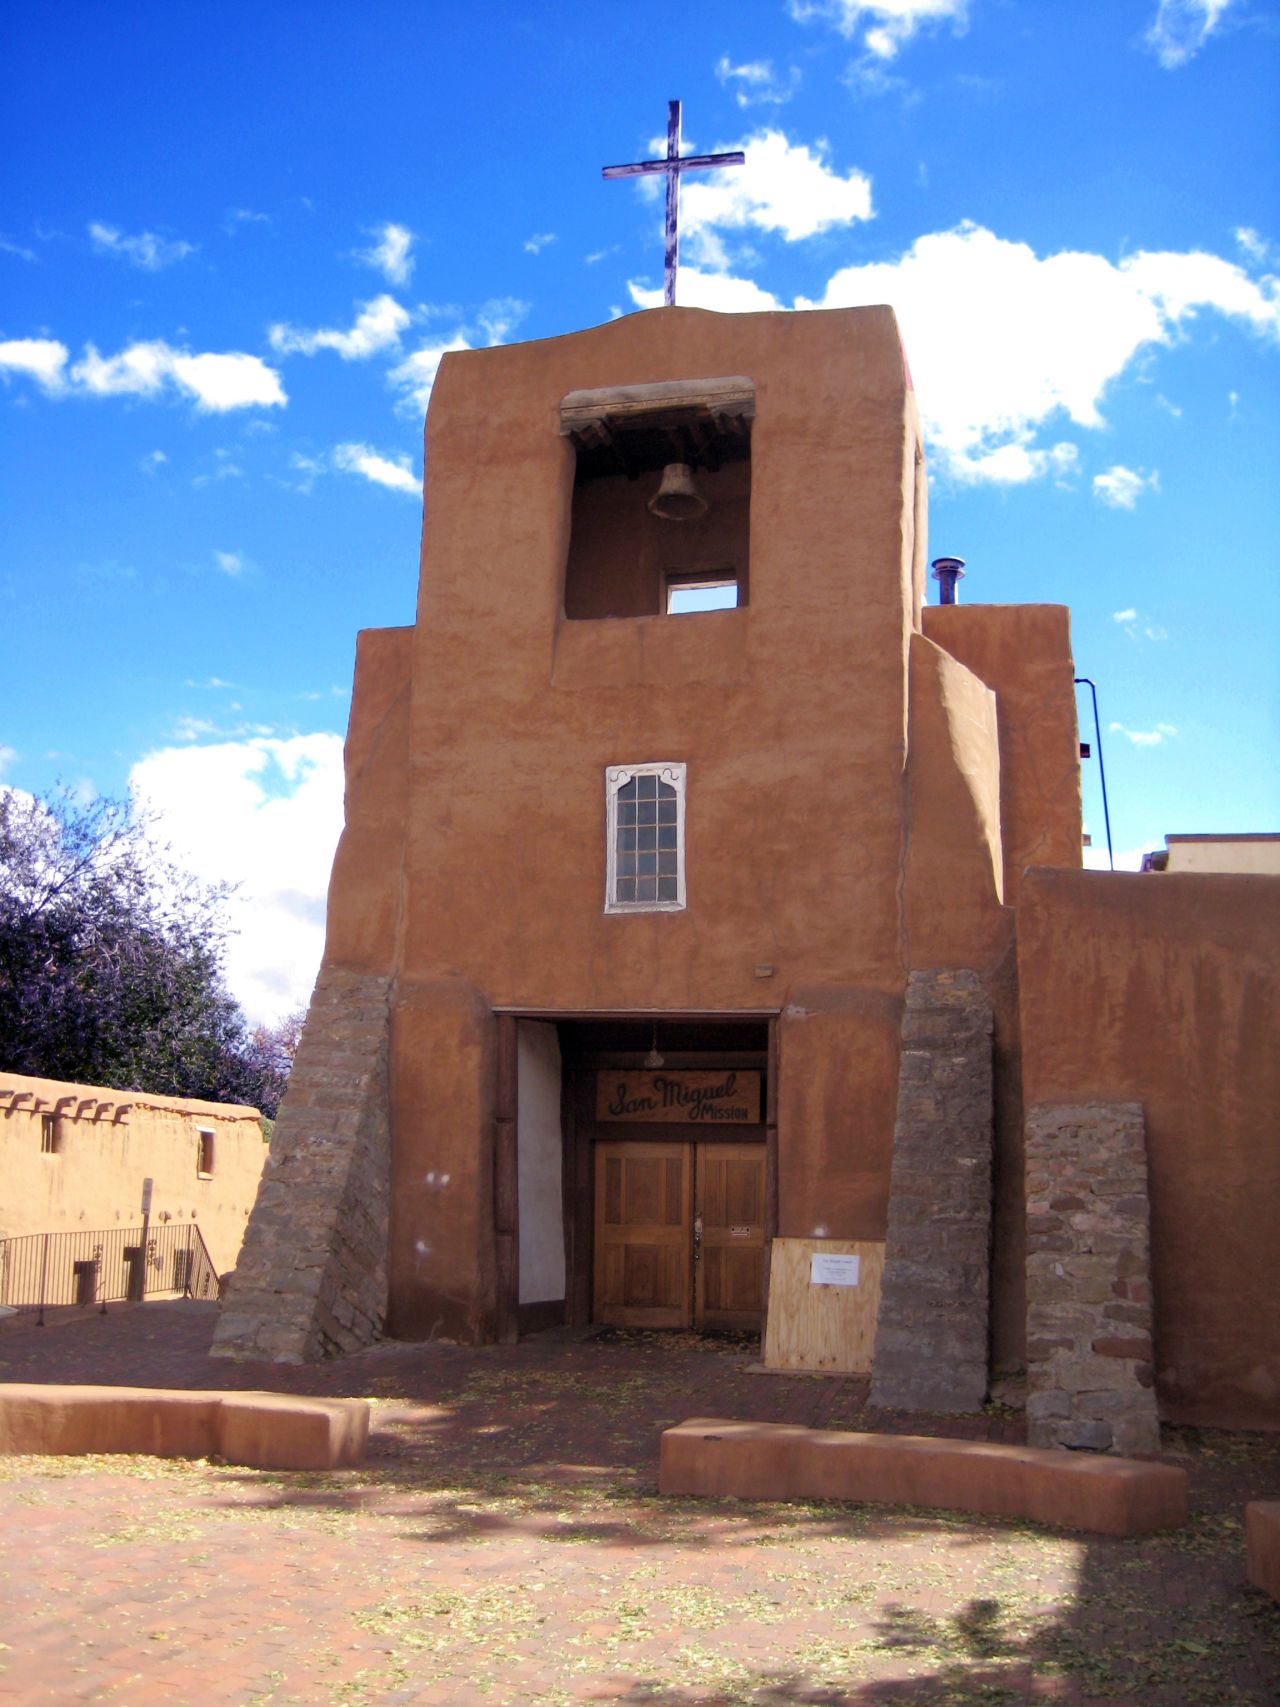 The Chapel of San Miguel is the oldest church in Santa Fe.